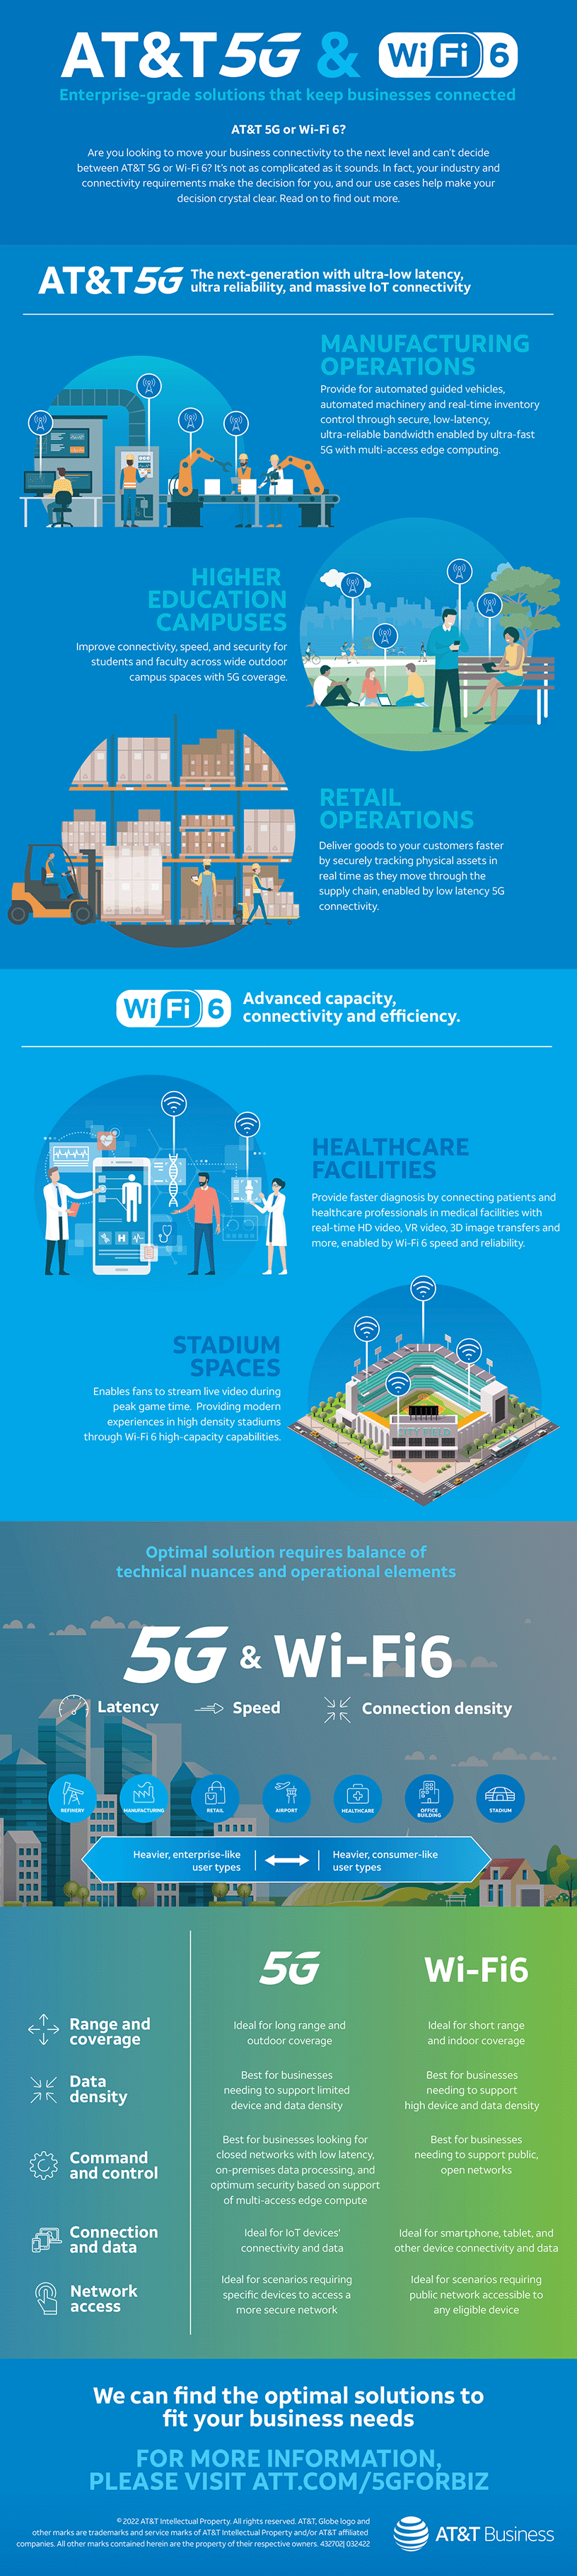 AT&T 5G and Wi-Fi 6 provide enterprise-grade solutions that keep businesses connected. 